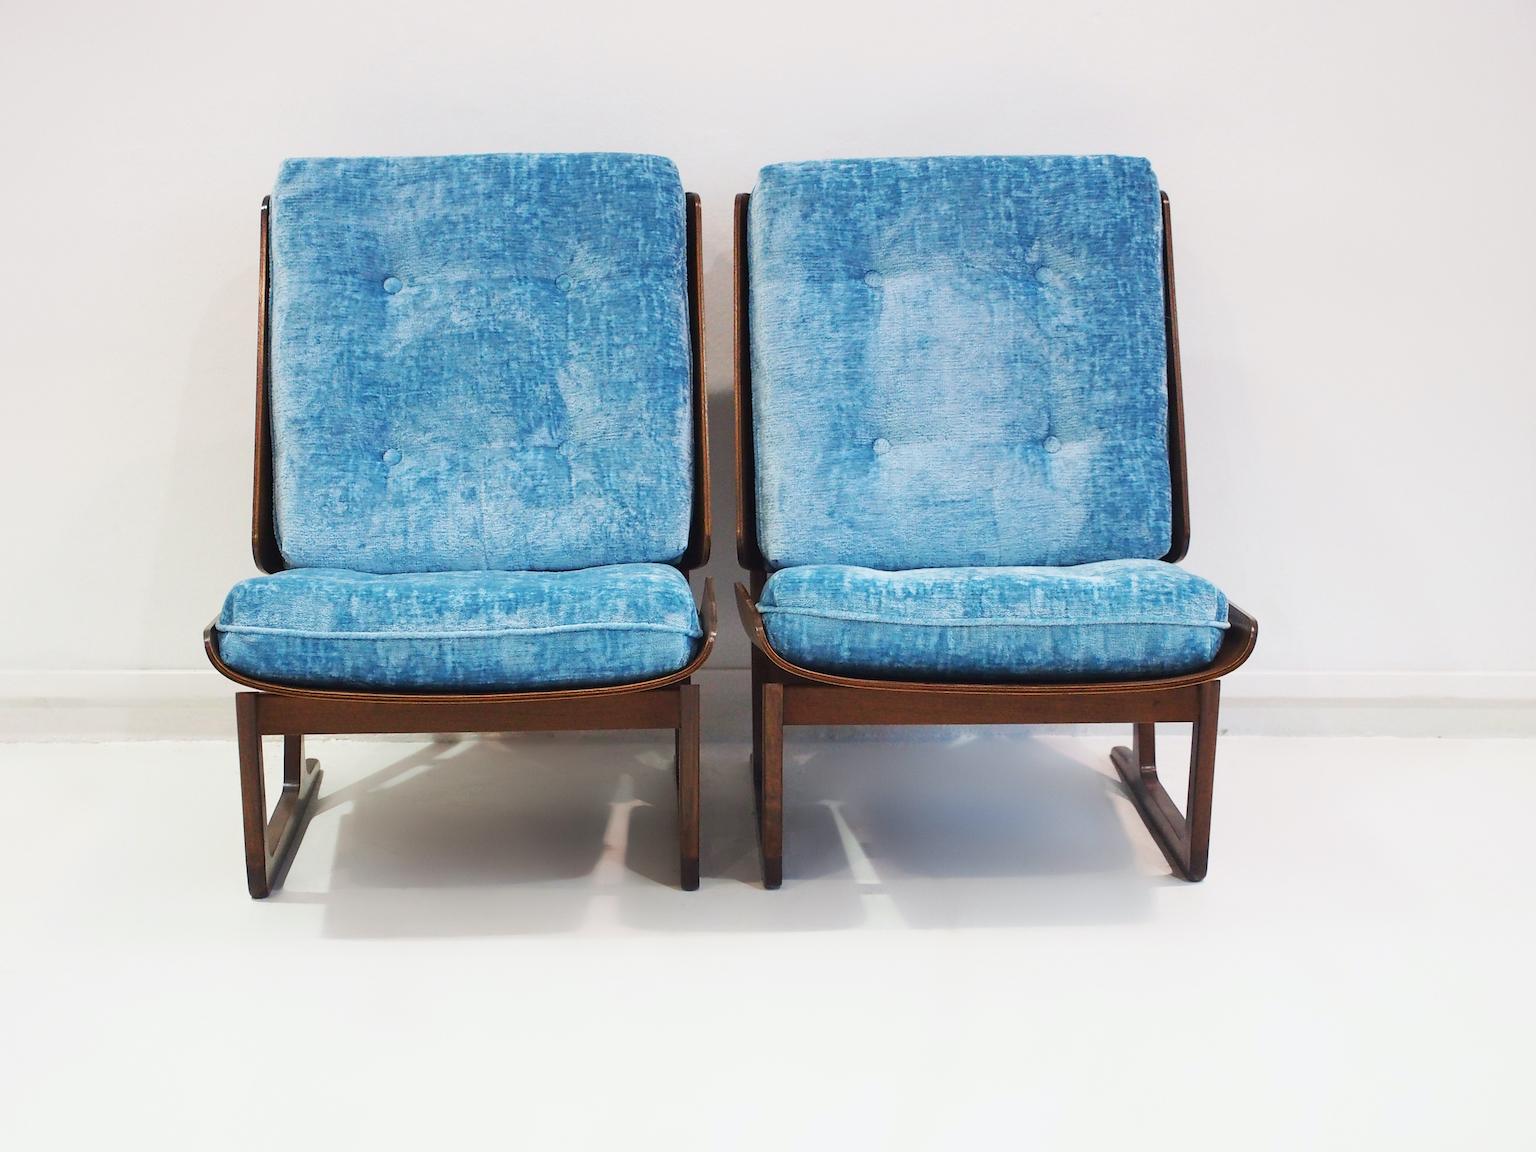 Pair of 1950s lounge chairs. Noteworthy is the chairs' backrest which is made of a single block of wood that wraps around the cushion. The same design is used for the seat. Some have attributed the design to a Danish furniture designer Grete Jalk.